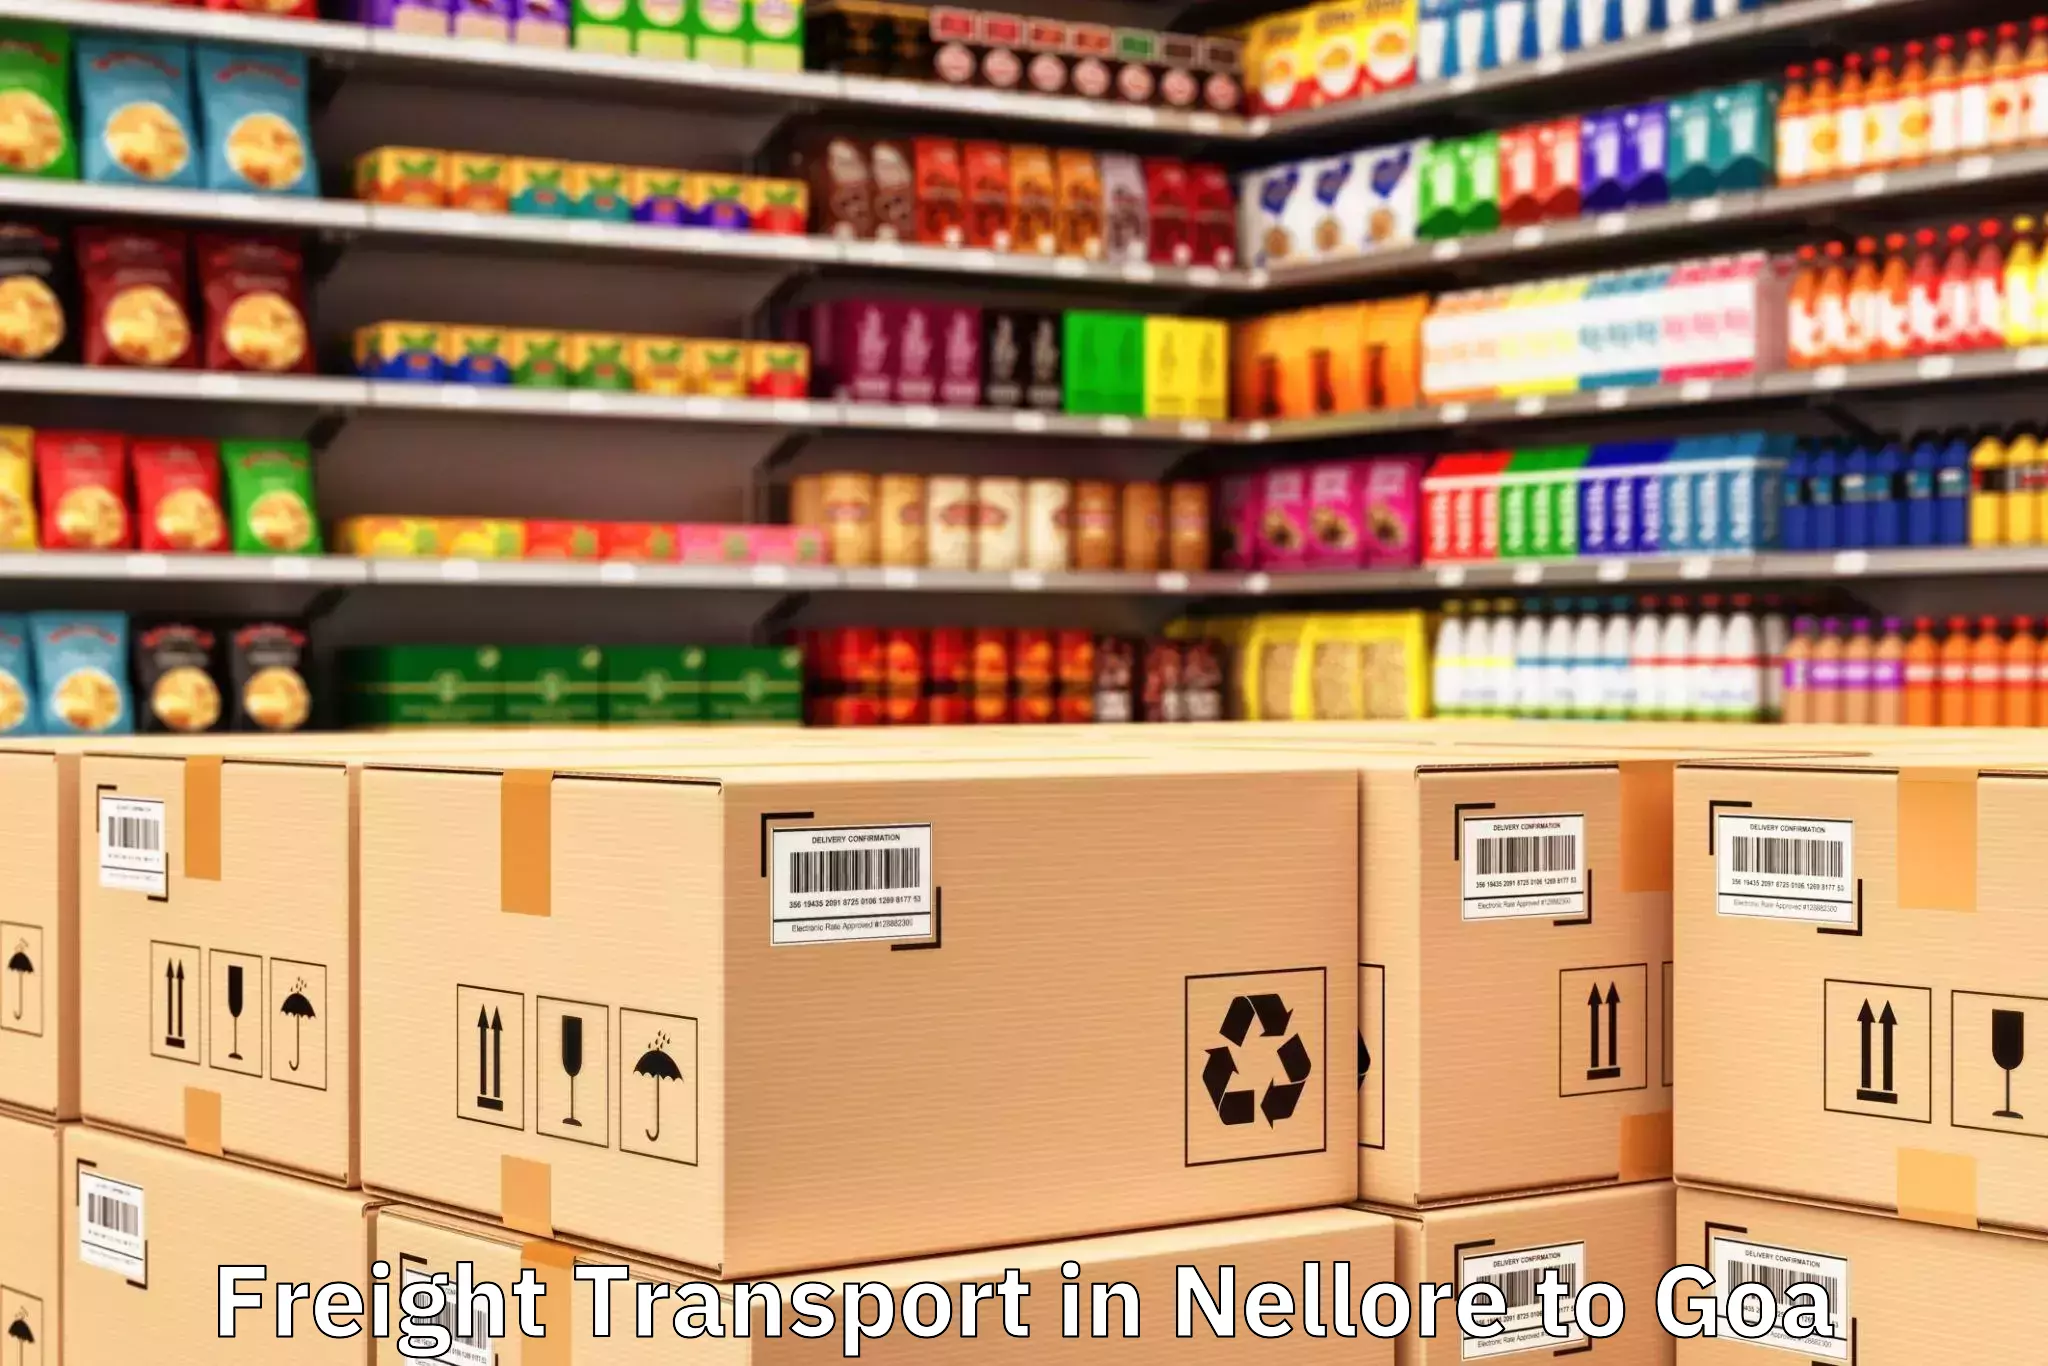 Easy Nellore to Goa Freight Transport Booking